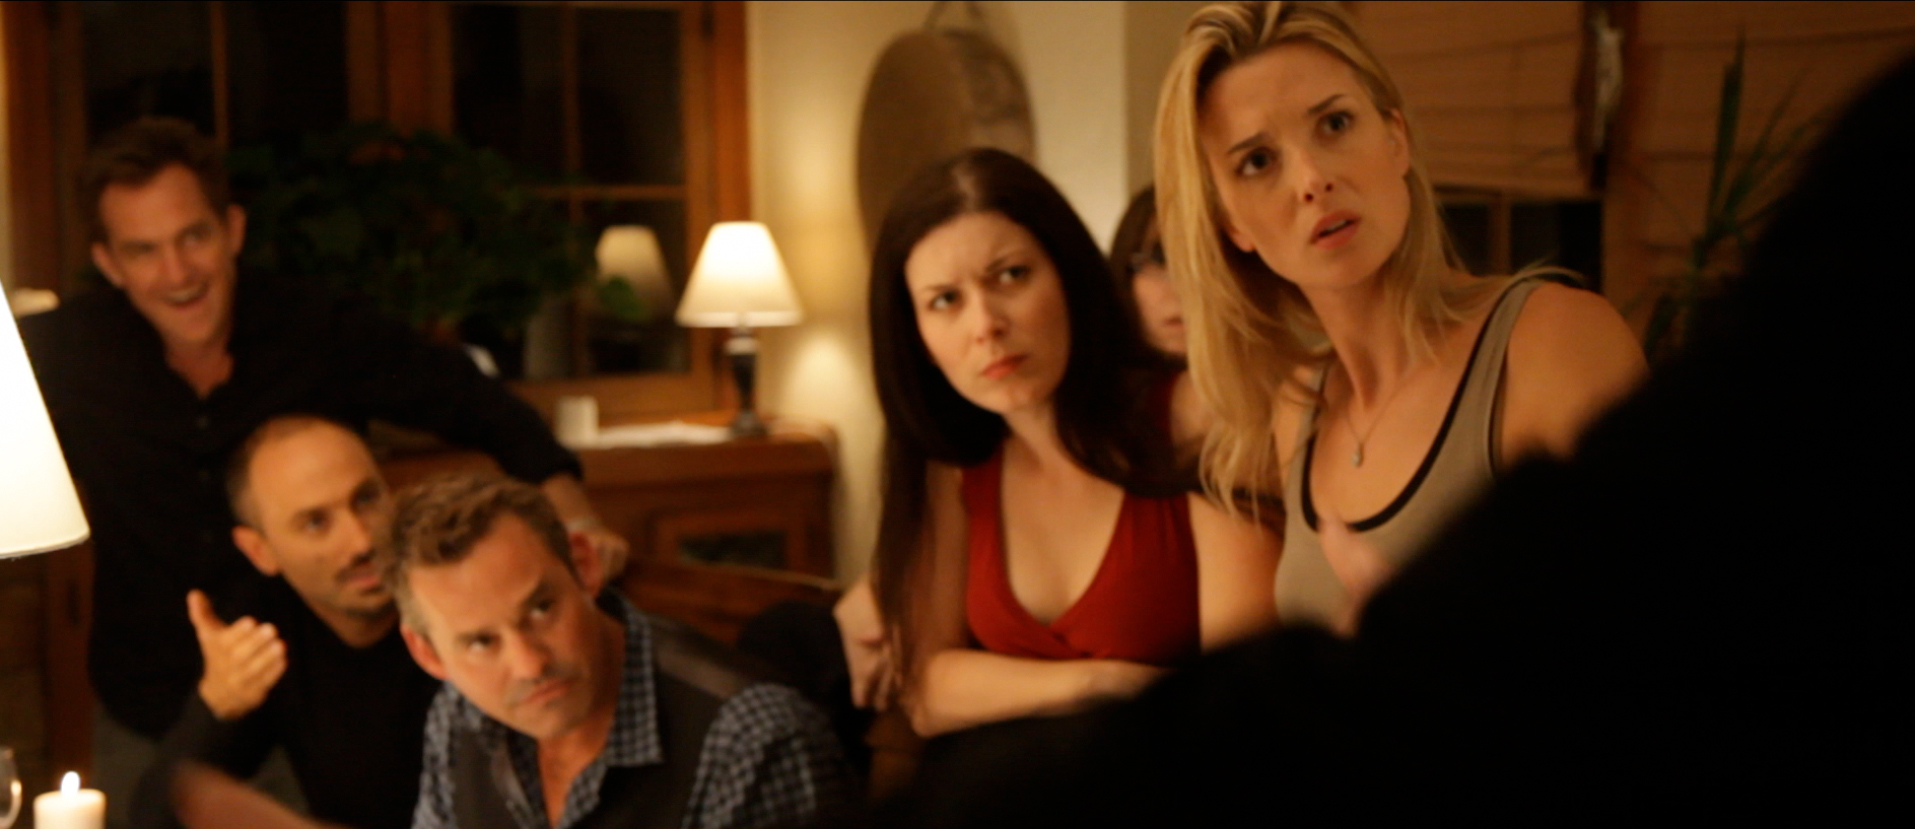 Still of Nicholas Brendon, Maury Sterling, Alex Manugian, Lauren Maher and Emily Baldoni in Coherence (2013)